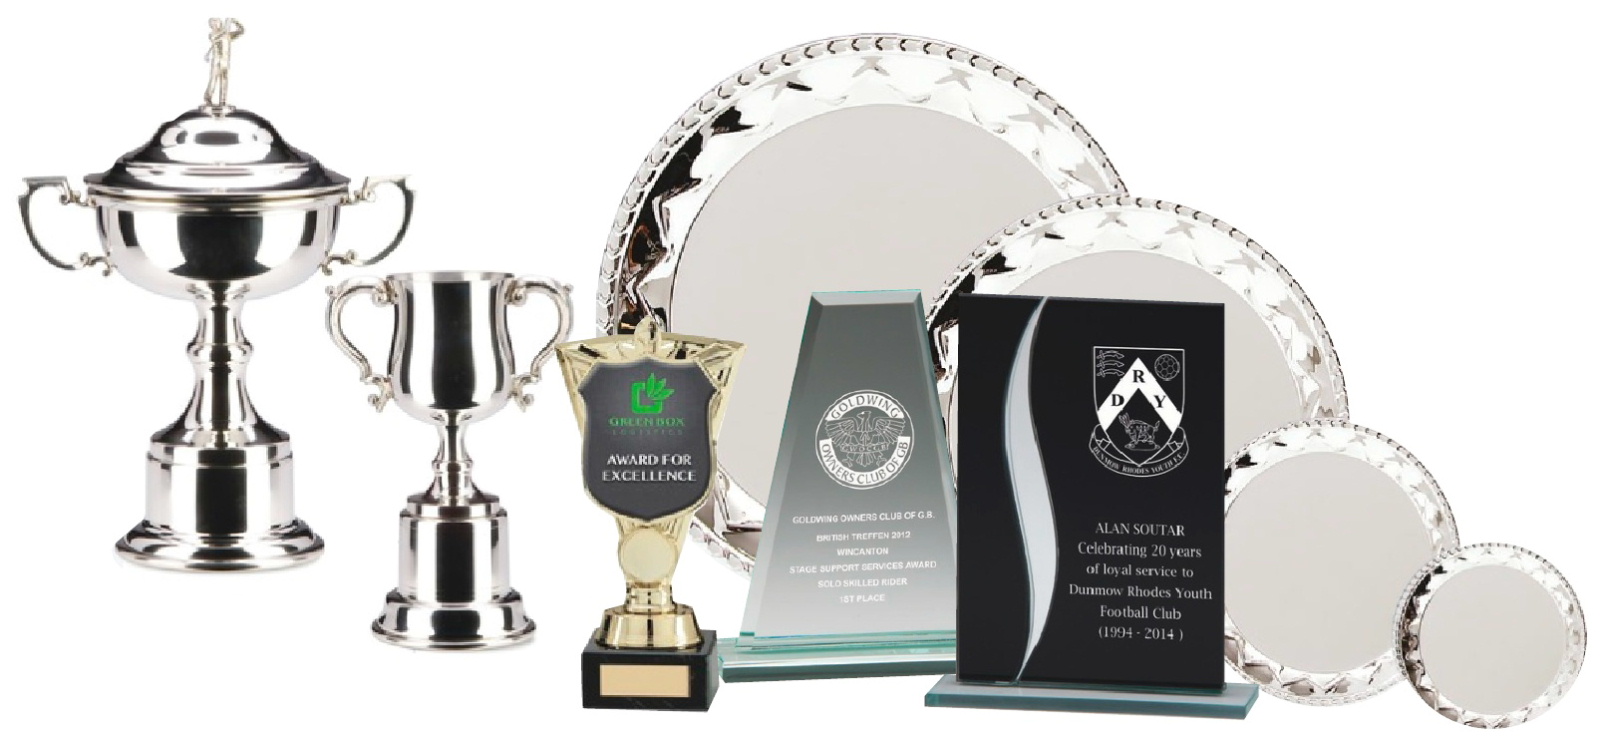 Trophy suppliers Stranraer displaying a range of cups, salvers and plaques engraved for local heroes